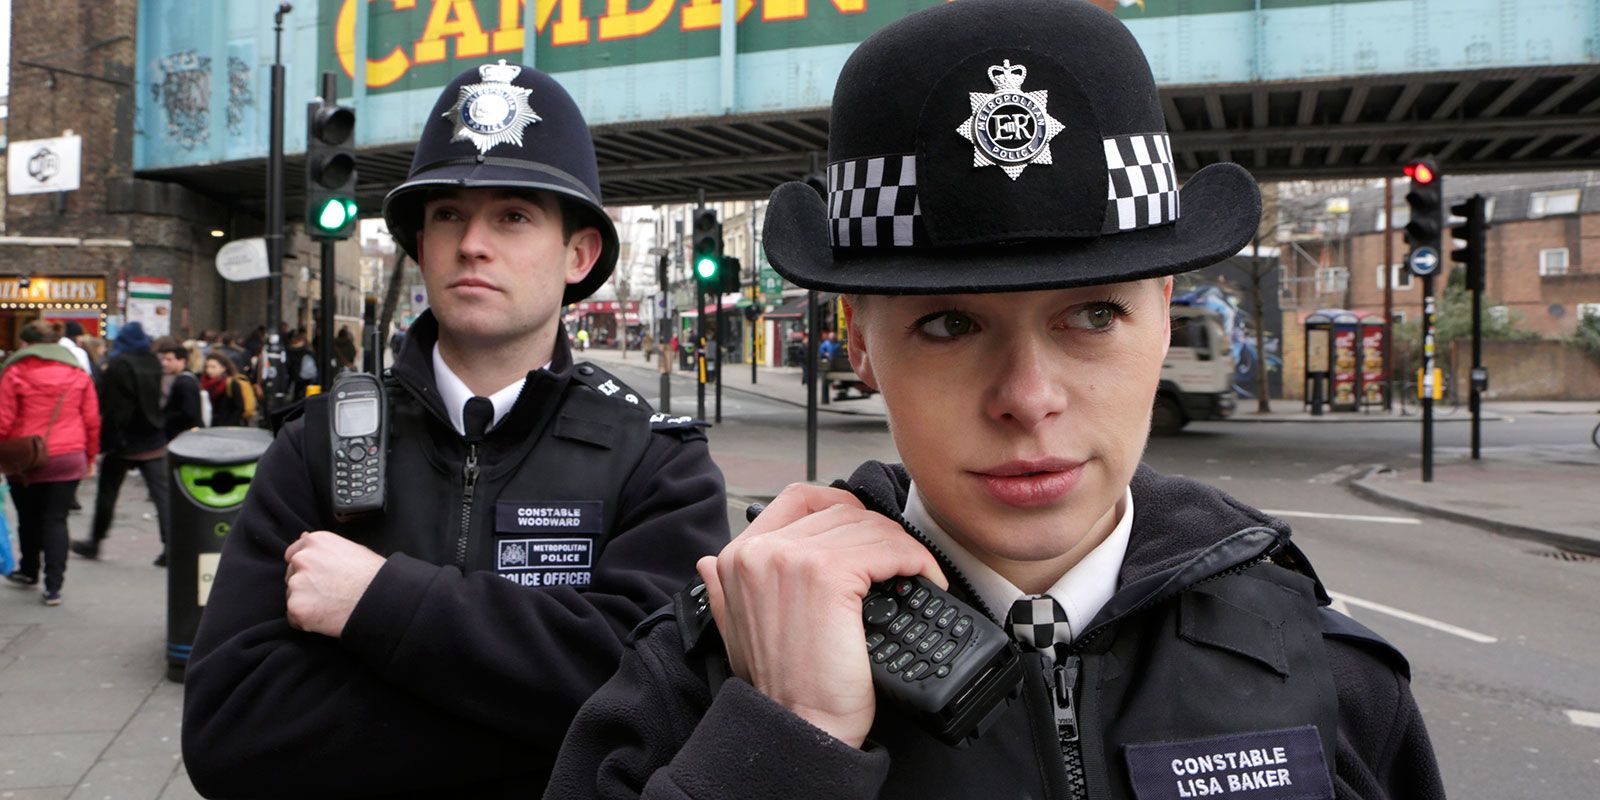 'Hurtful Comments': British Police Visit Woman For 'Disrespecting Pedophiles' on Social Media